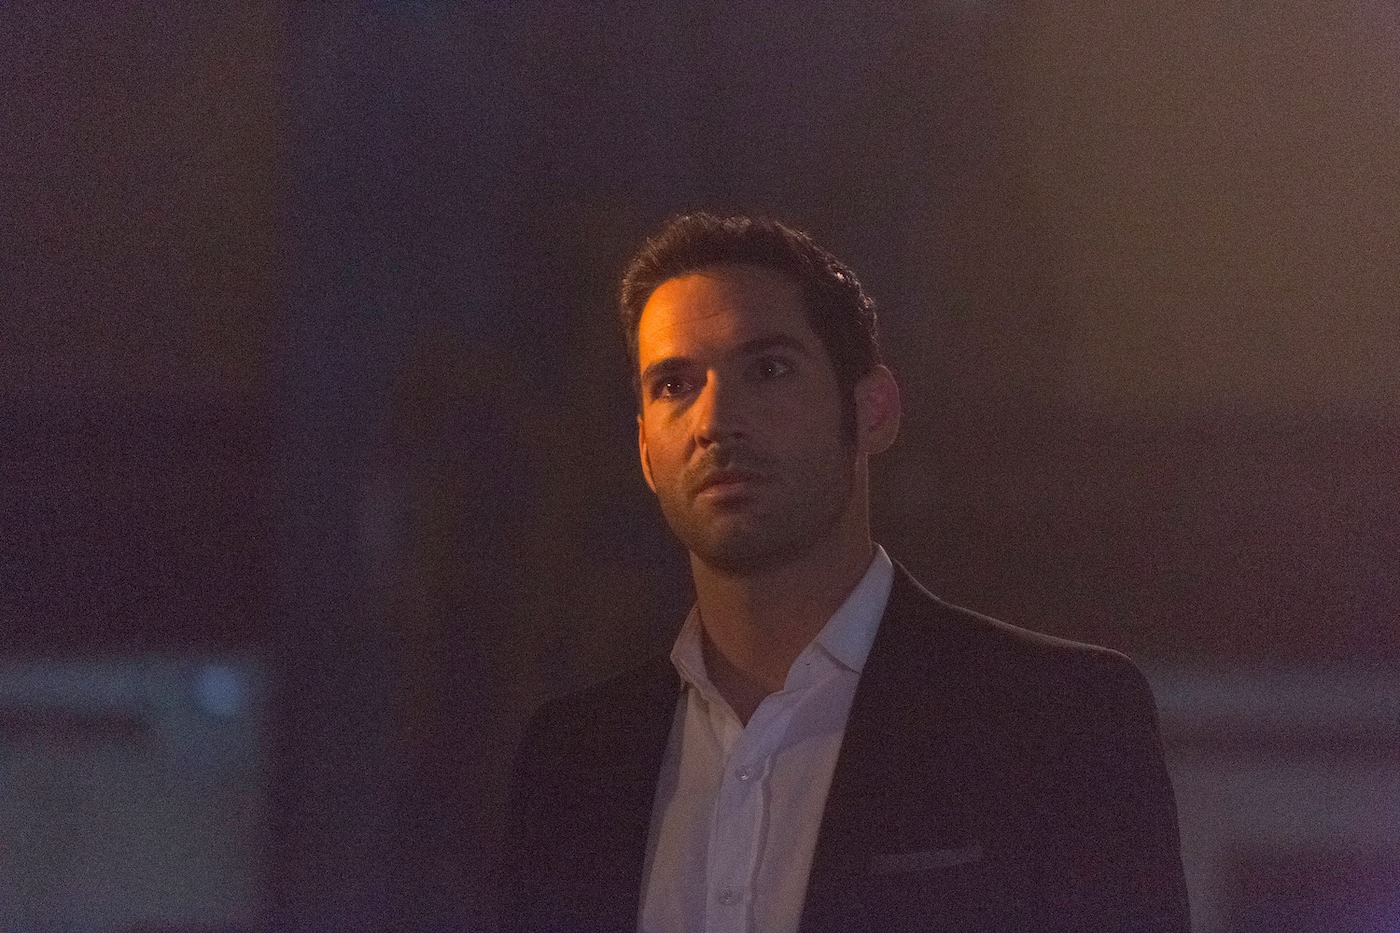 Actor Tom Ellis as Lucifer in the 'Weaponizer' episode of 'Lucifer' Season 2